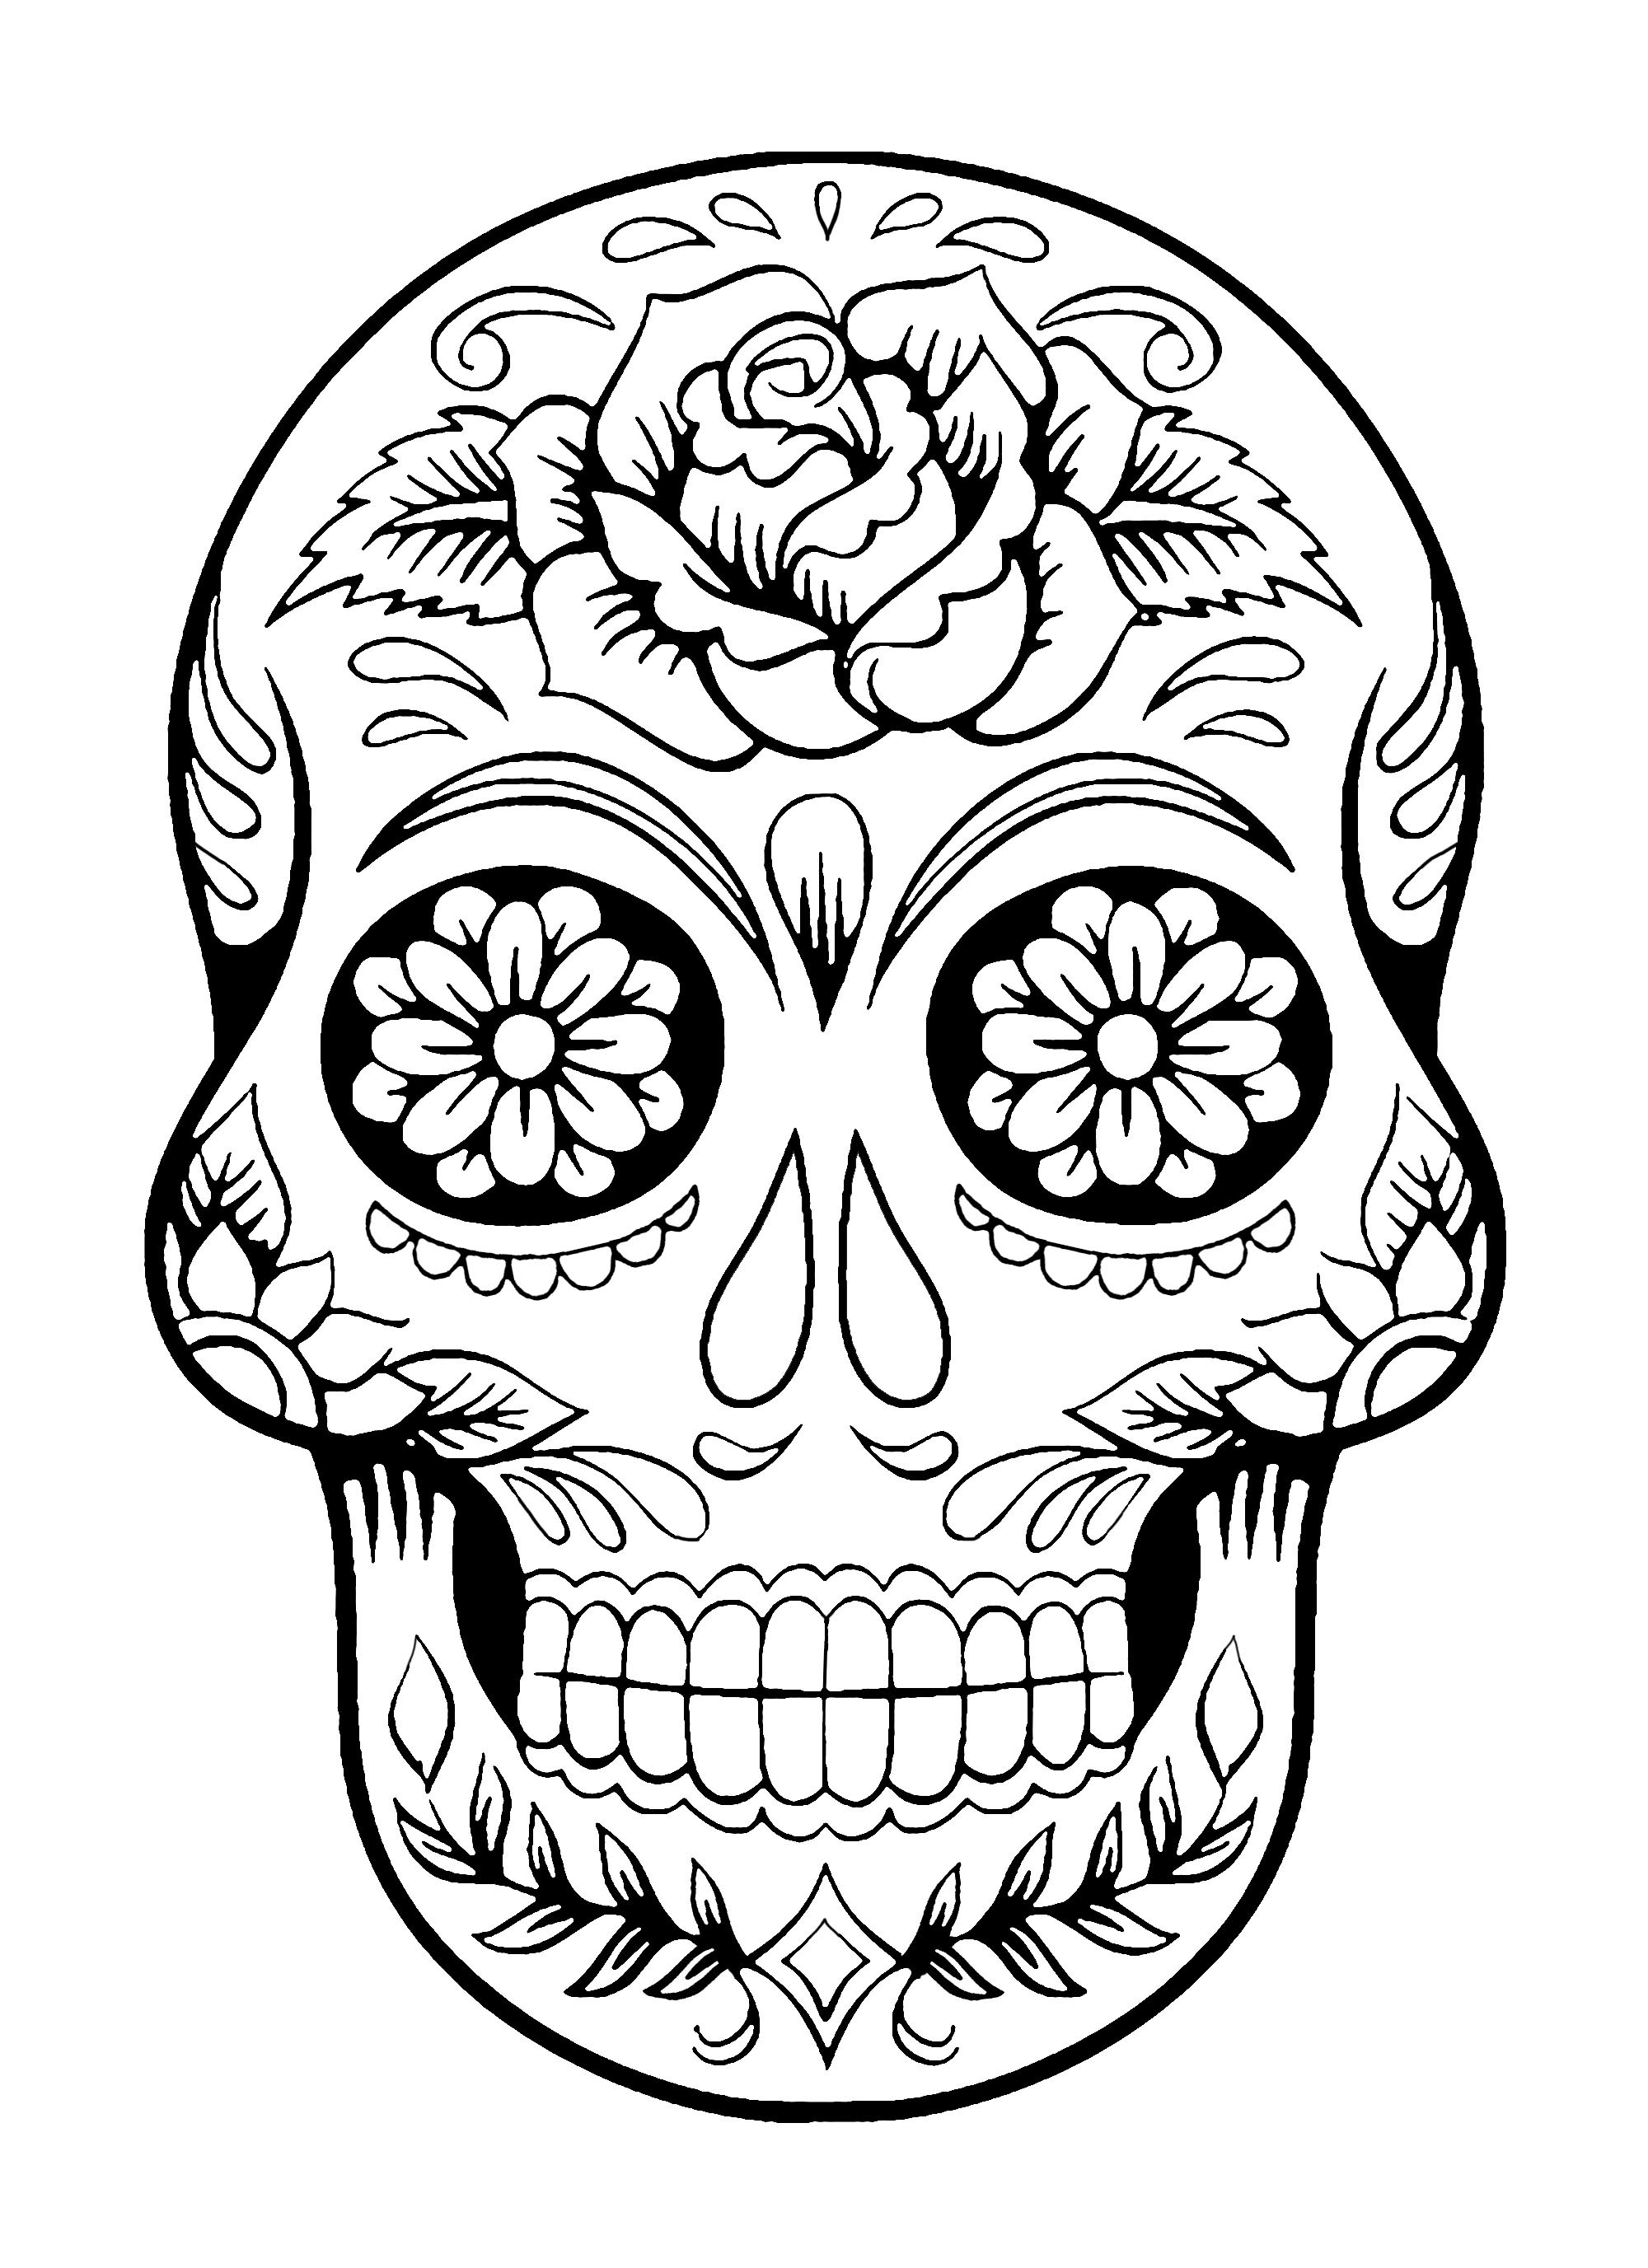 Skull - Coloring Pages for Adults